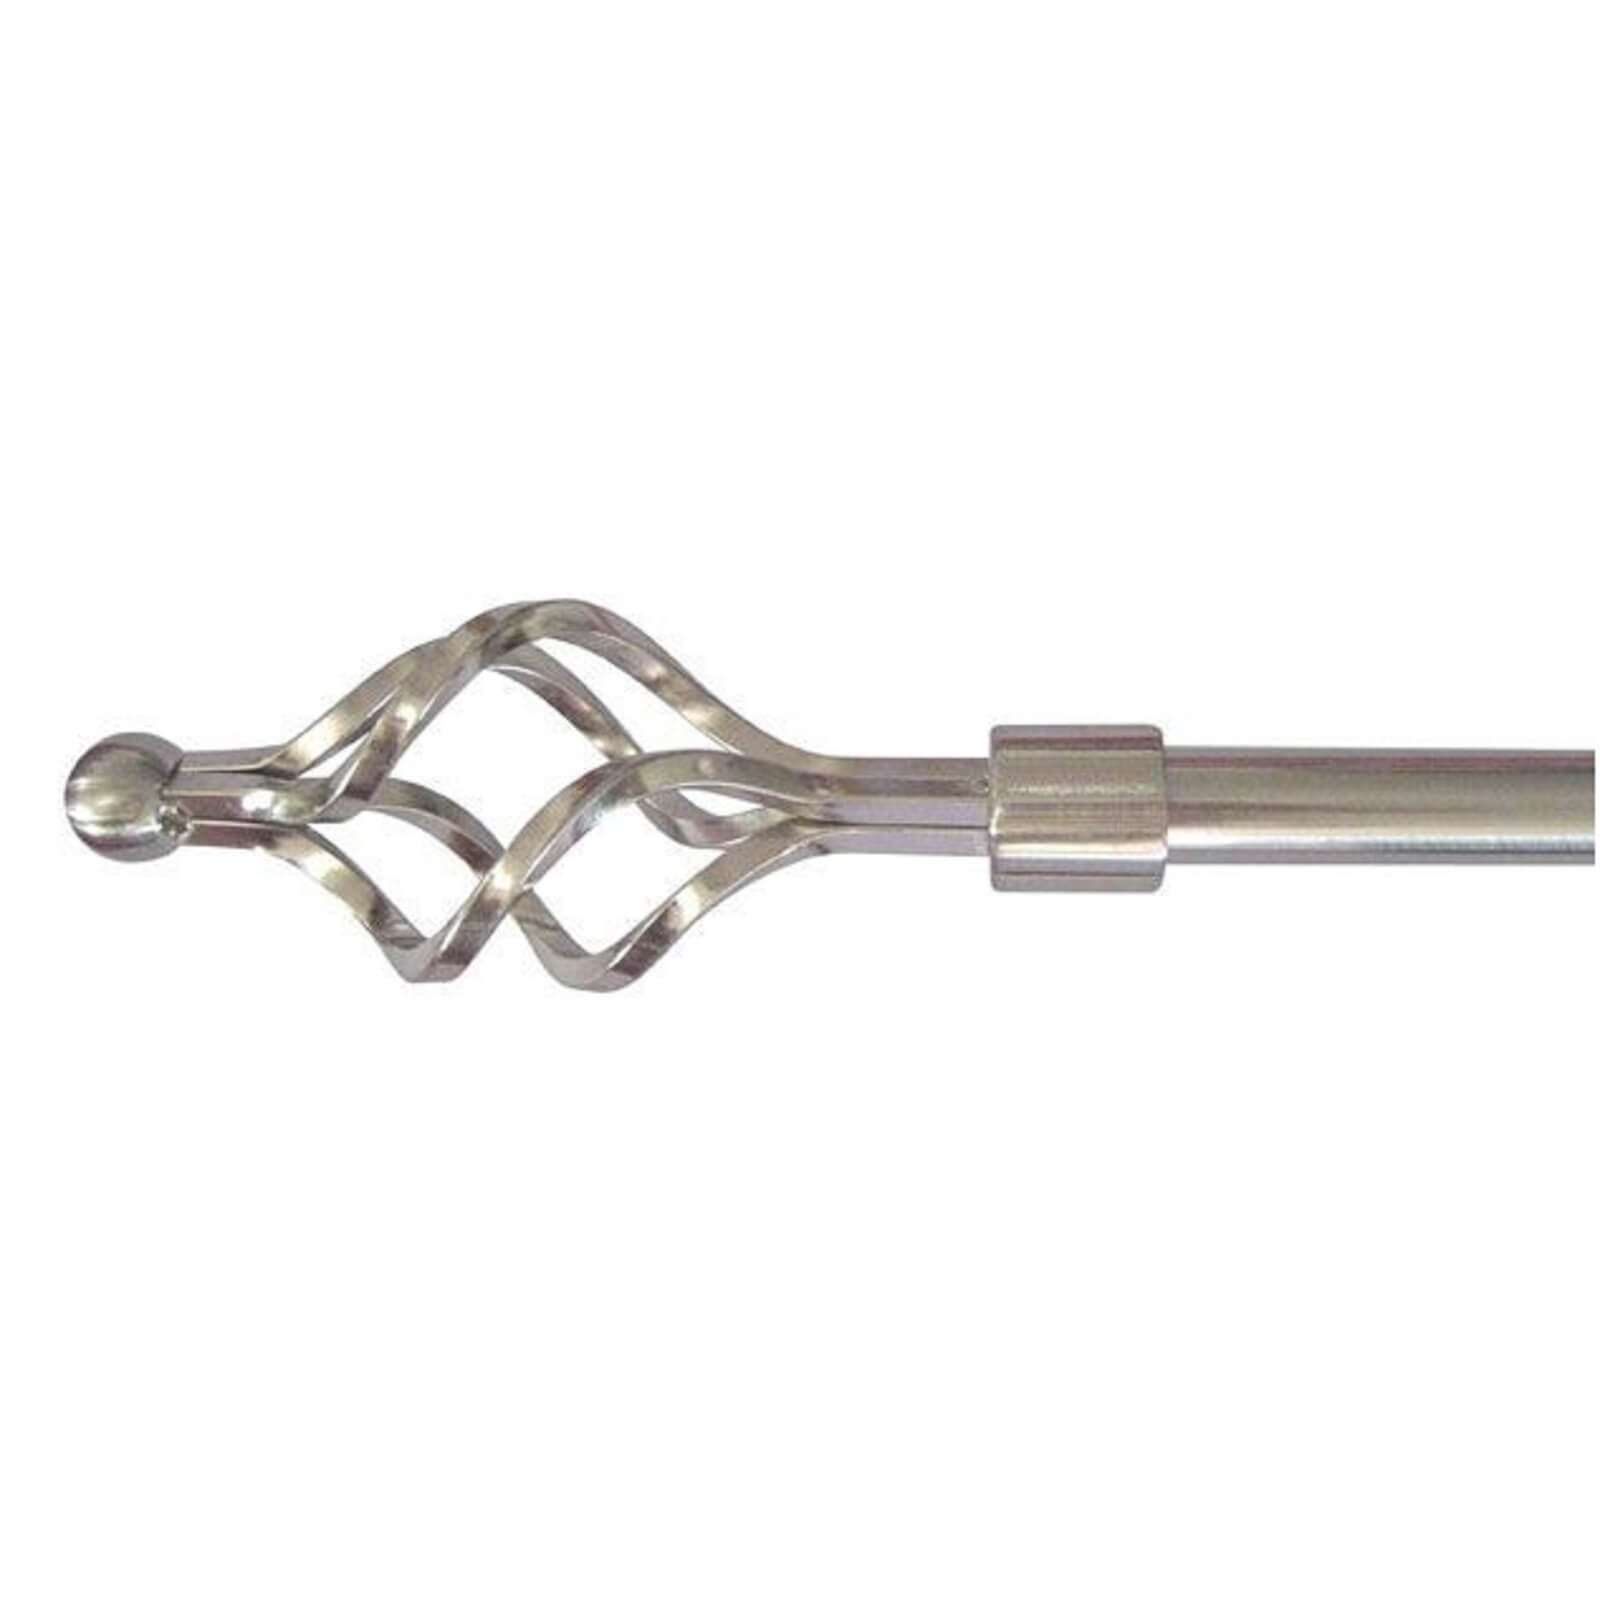 Extendable Cage Finial Curtain Pole - Satin Steel - 1.2-2.1m (16/19mm)